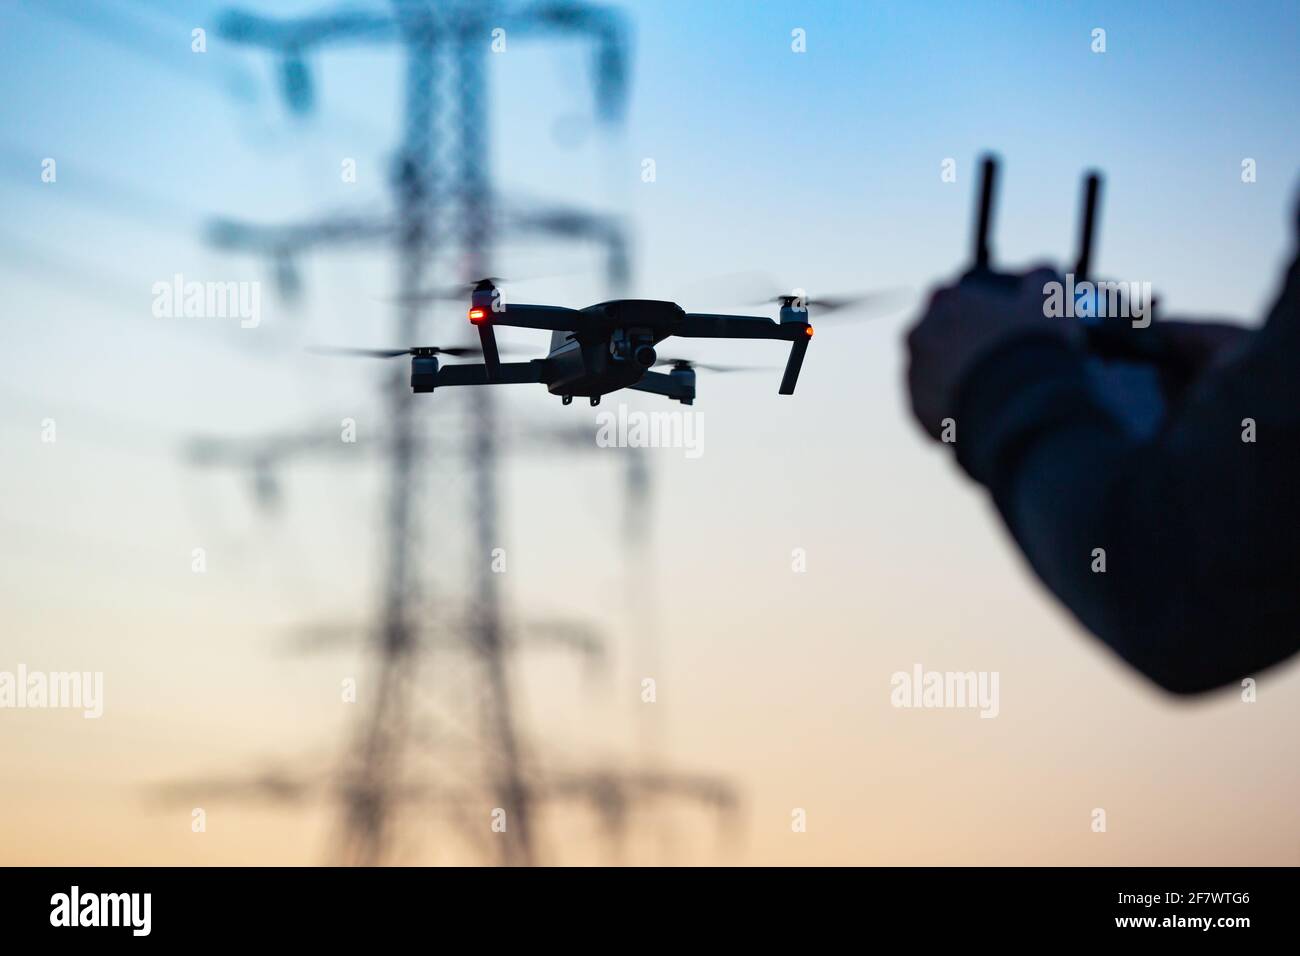 Pilot flying a drone collecting the data remotely from a power tower station or for telecommunication. Drone safety, power transmission tower. Stock Photo